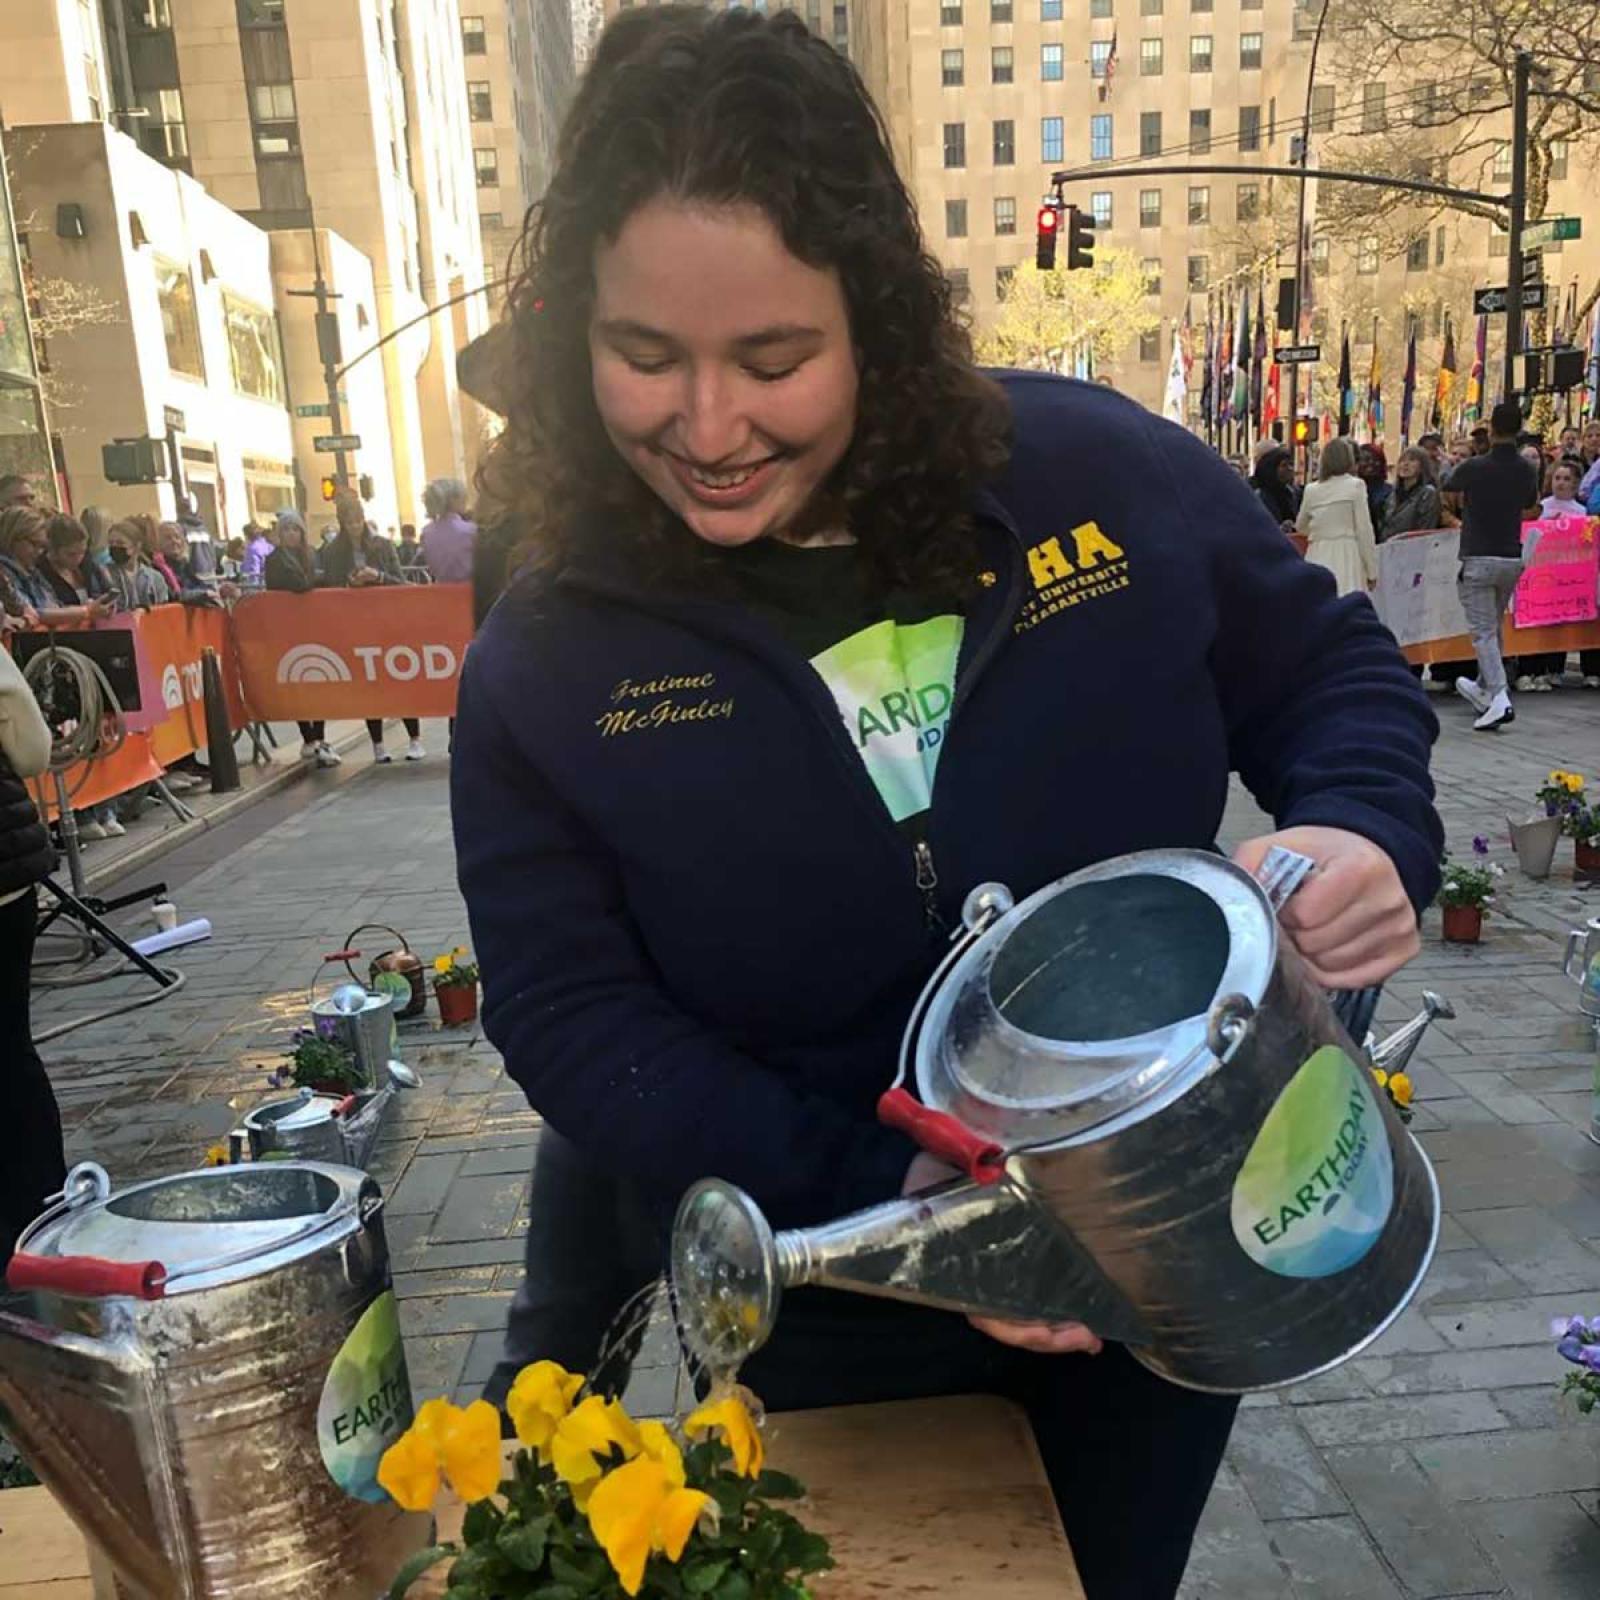 Pace student Grainne McGinley watering a plant at the Today Show